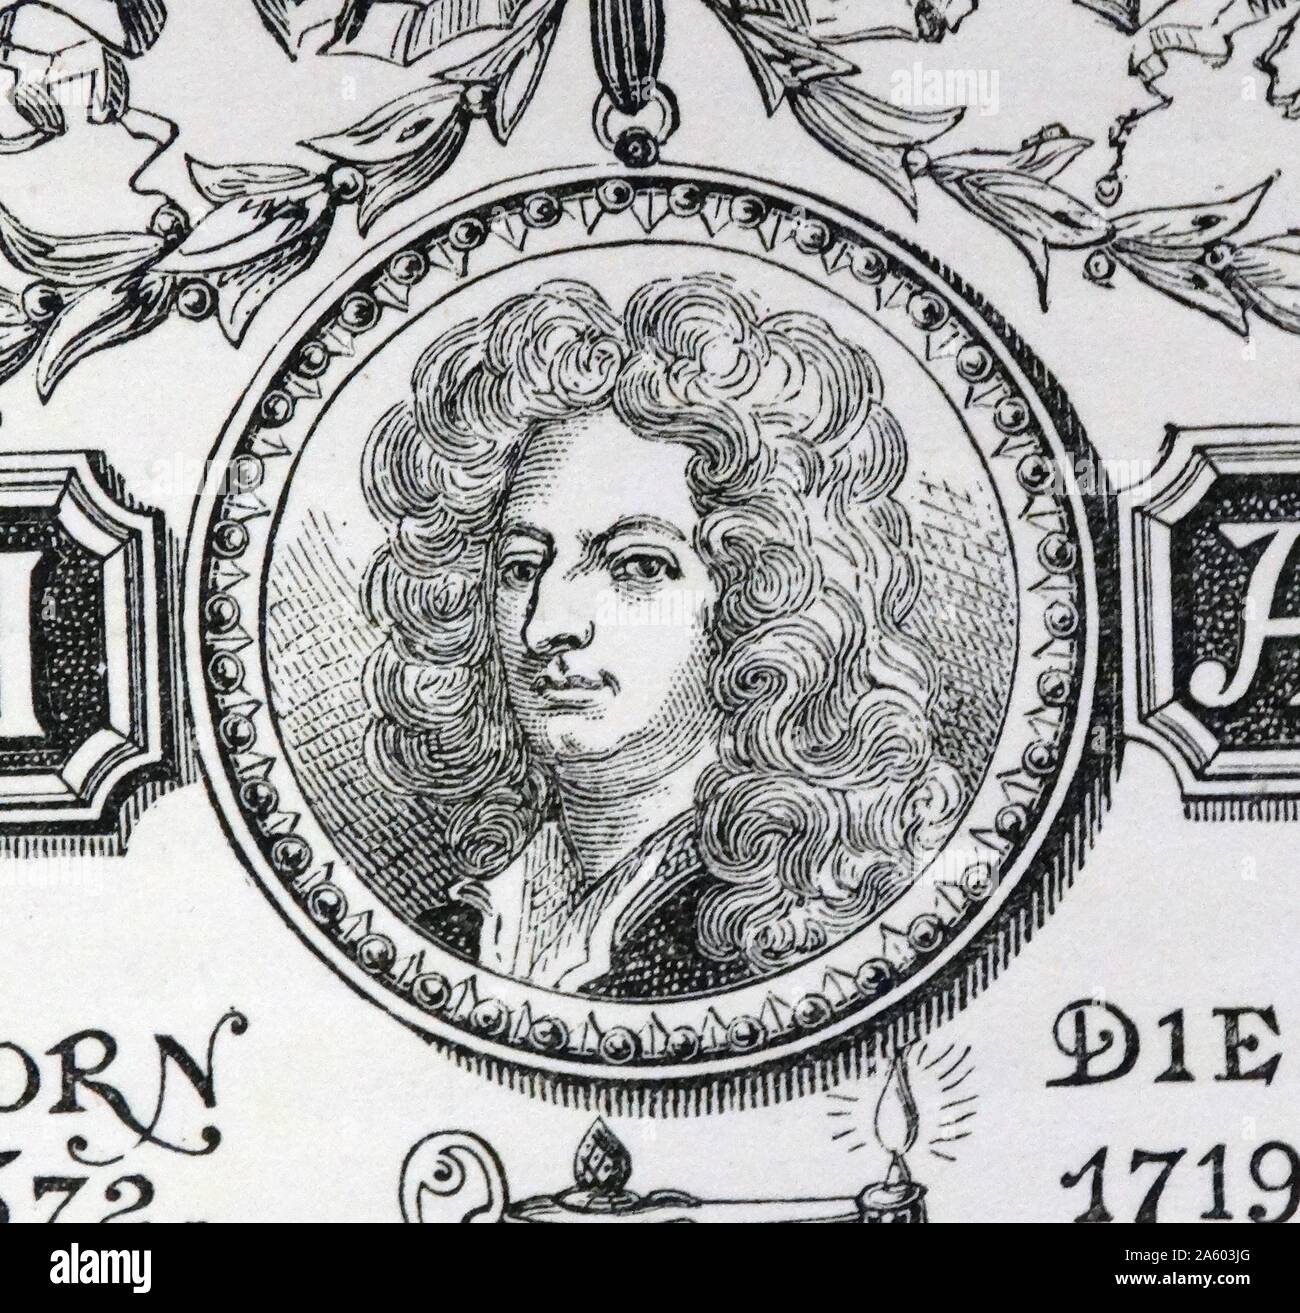 Engraved portrait of Joseph Addison (1672-1719) an English essayist, poet, playwright, and politician. Dated 16th Century Stock Photo